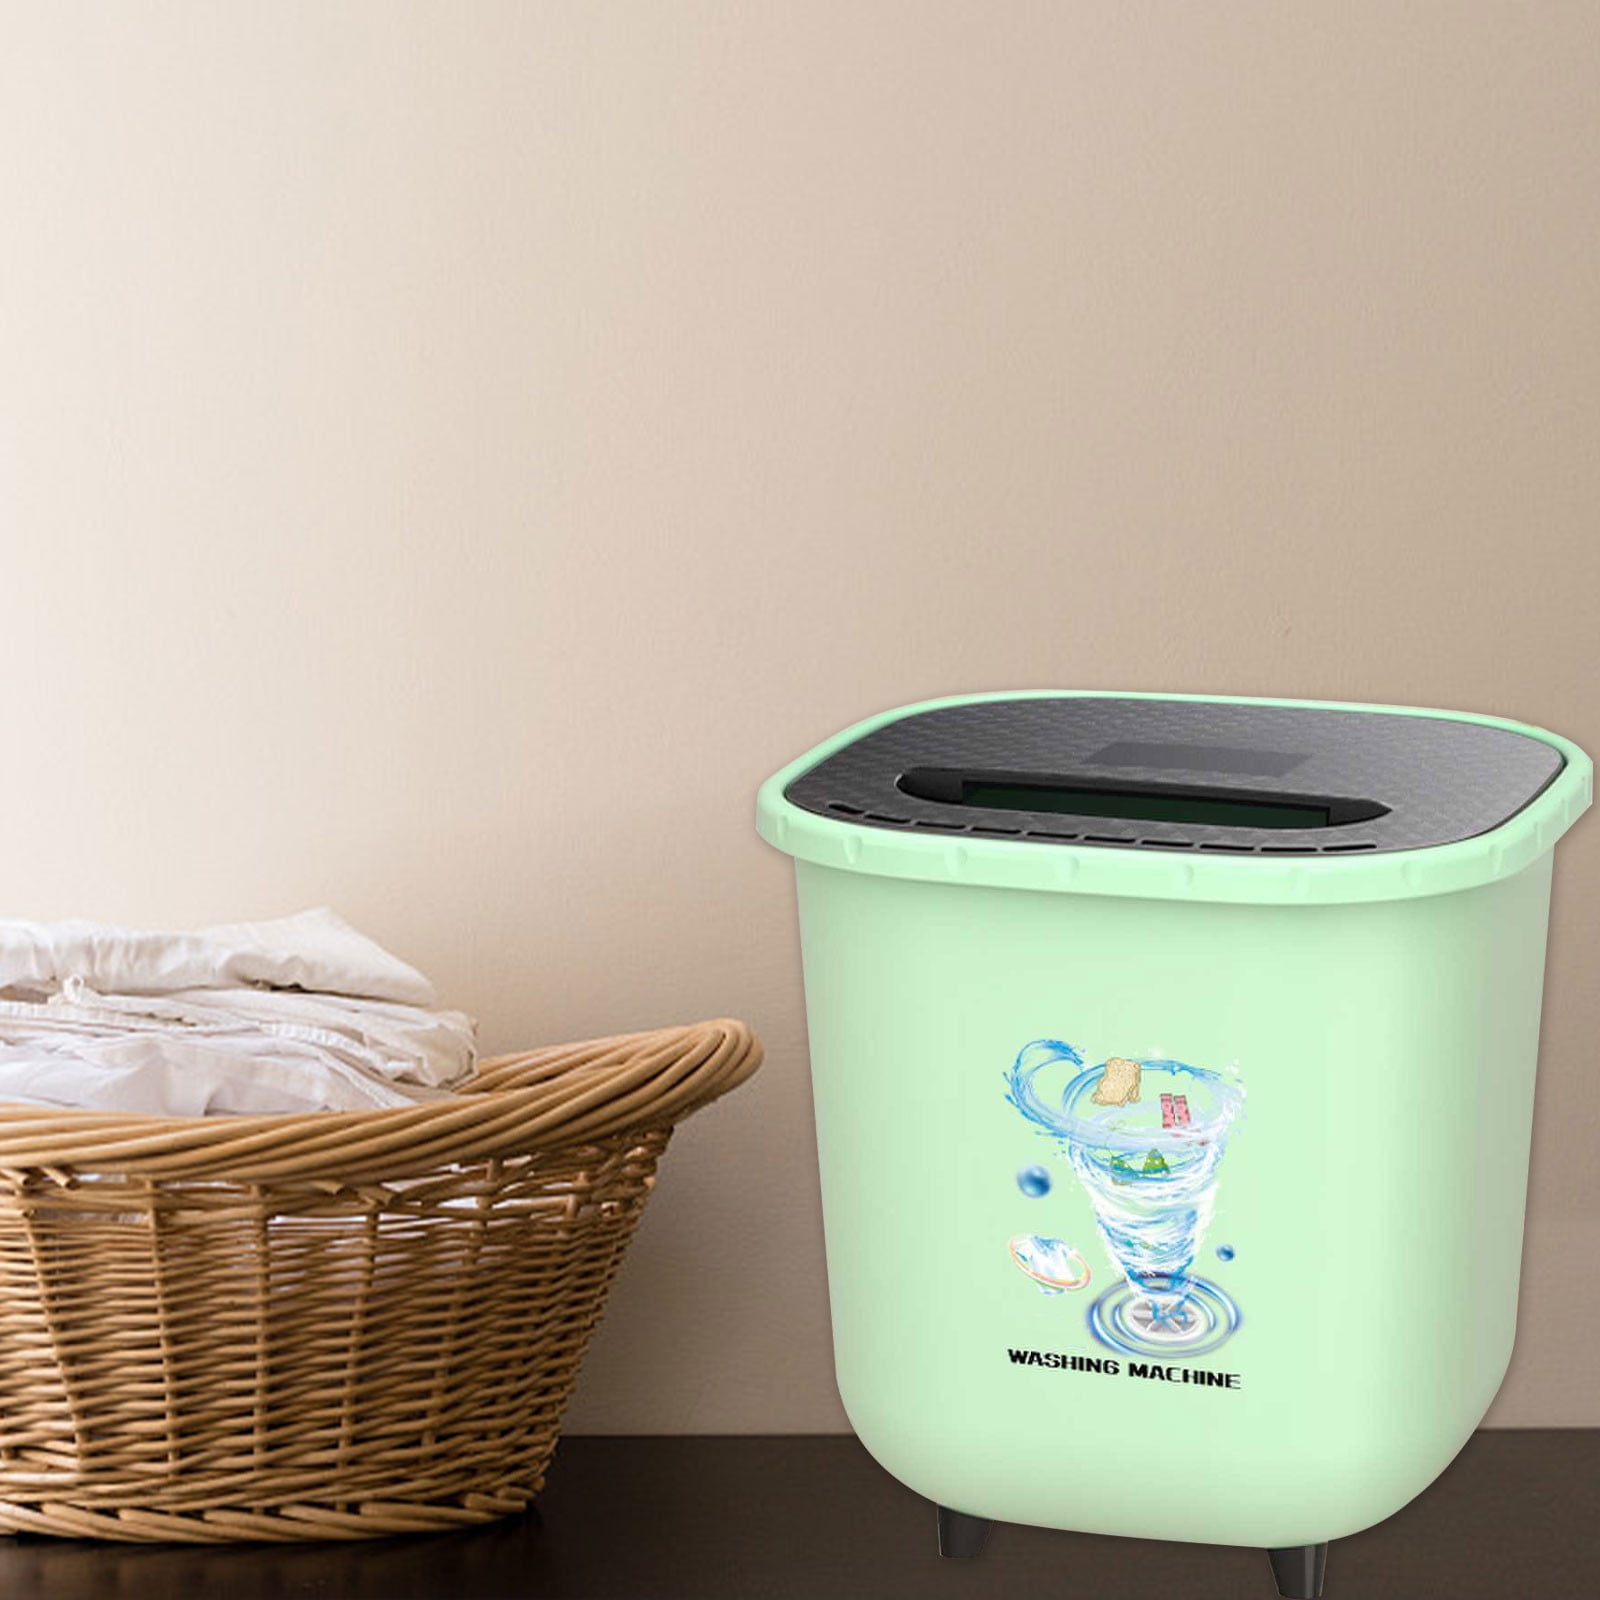 KAPAS Foldable Mini Washing Machine, (5.7Lb/2.6kg Capacity) Portable  Compact Lightweight Washer for BABY Clothes, Travel, Camping, Truck  Driving